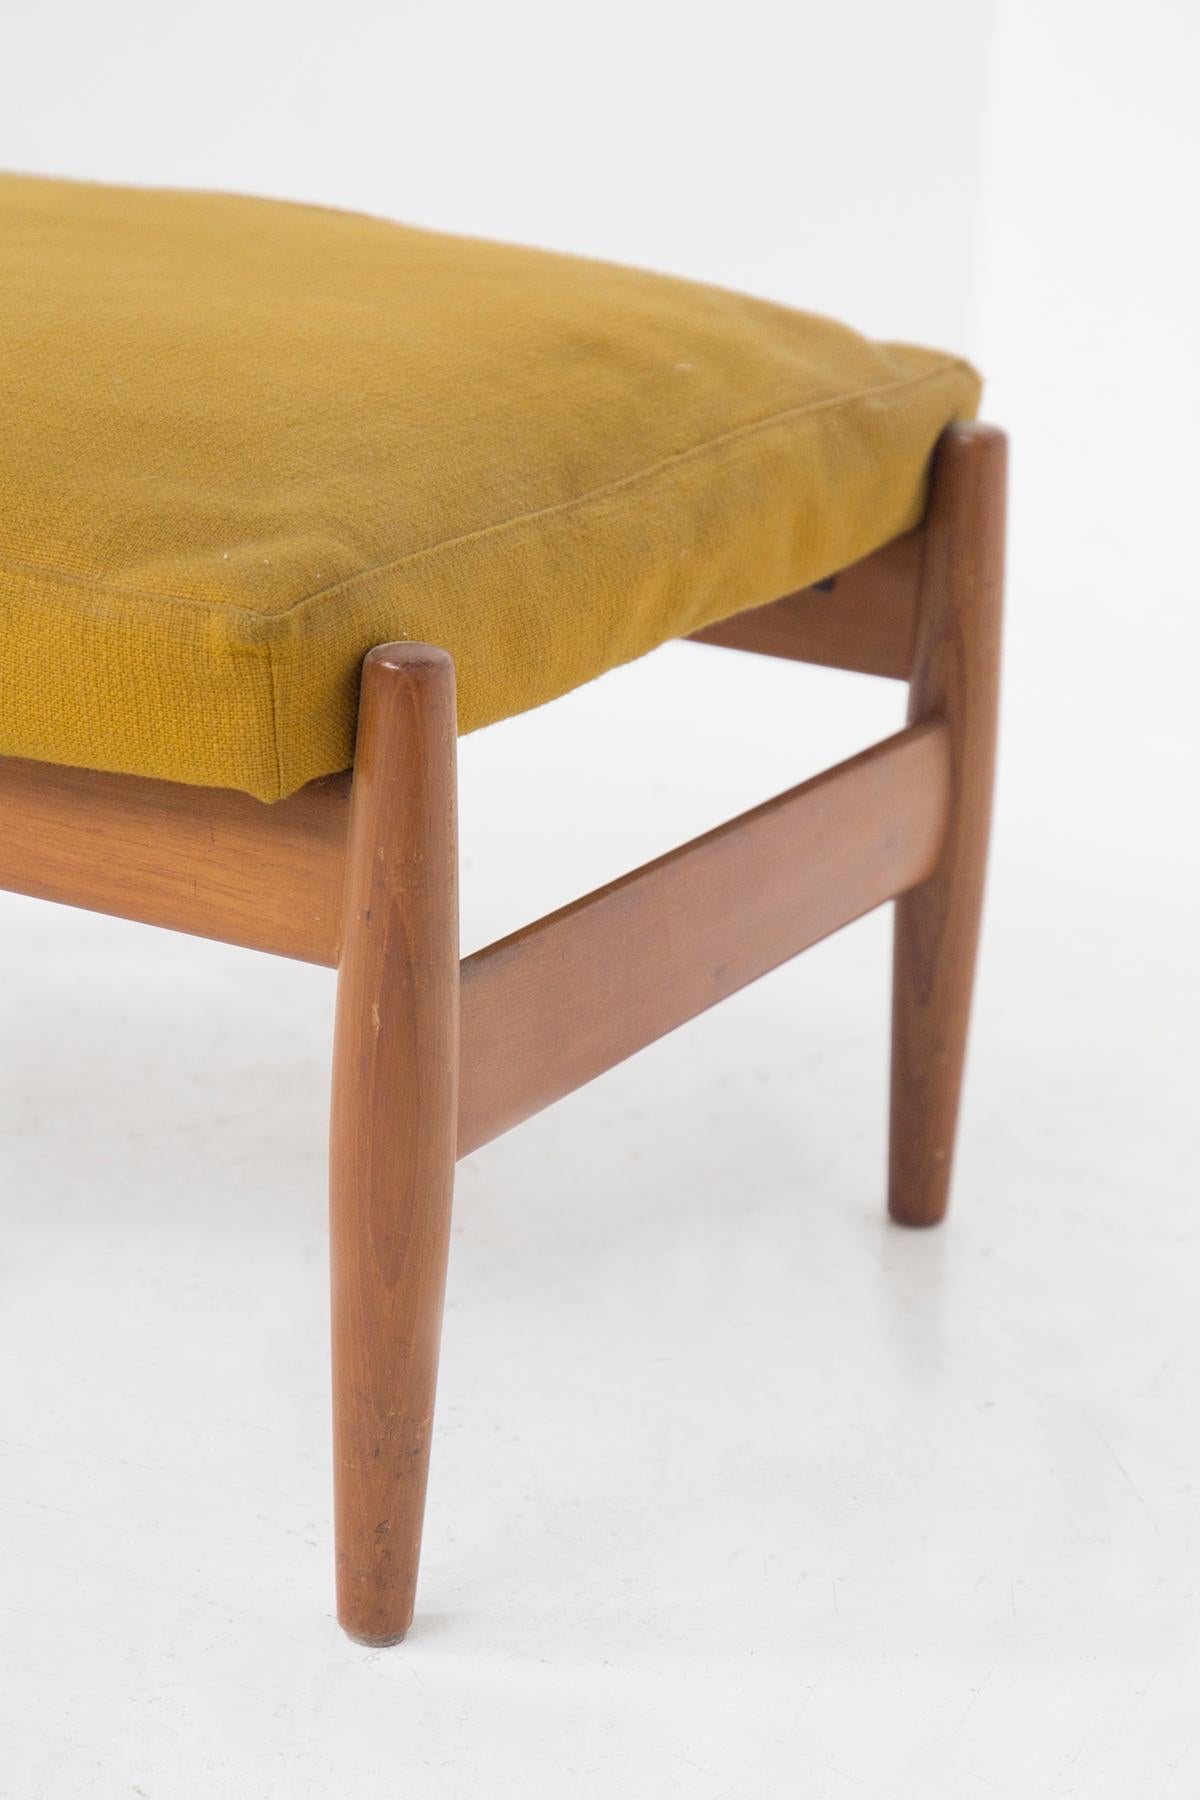 Beautiful Italian wooden stool produced in the 1950s, of fine Italian craftsmanship.
The stool is finely crafted in wood. The frame is supported by four wooden legs, massive and very distinctive, yet powerful and strong. On the side are planks that